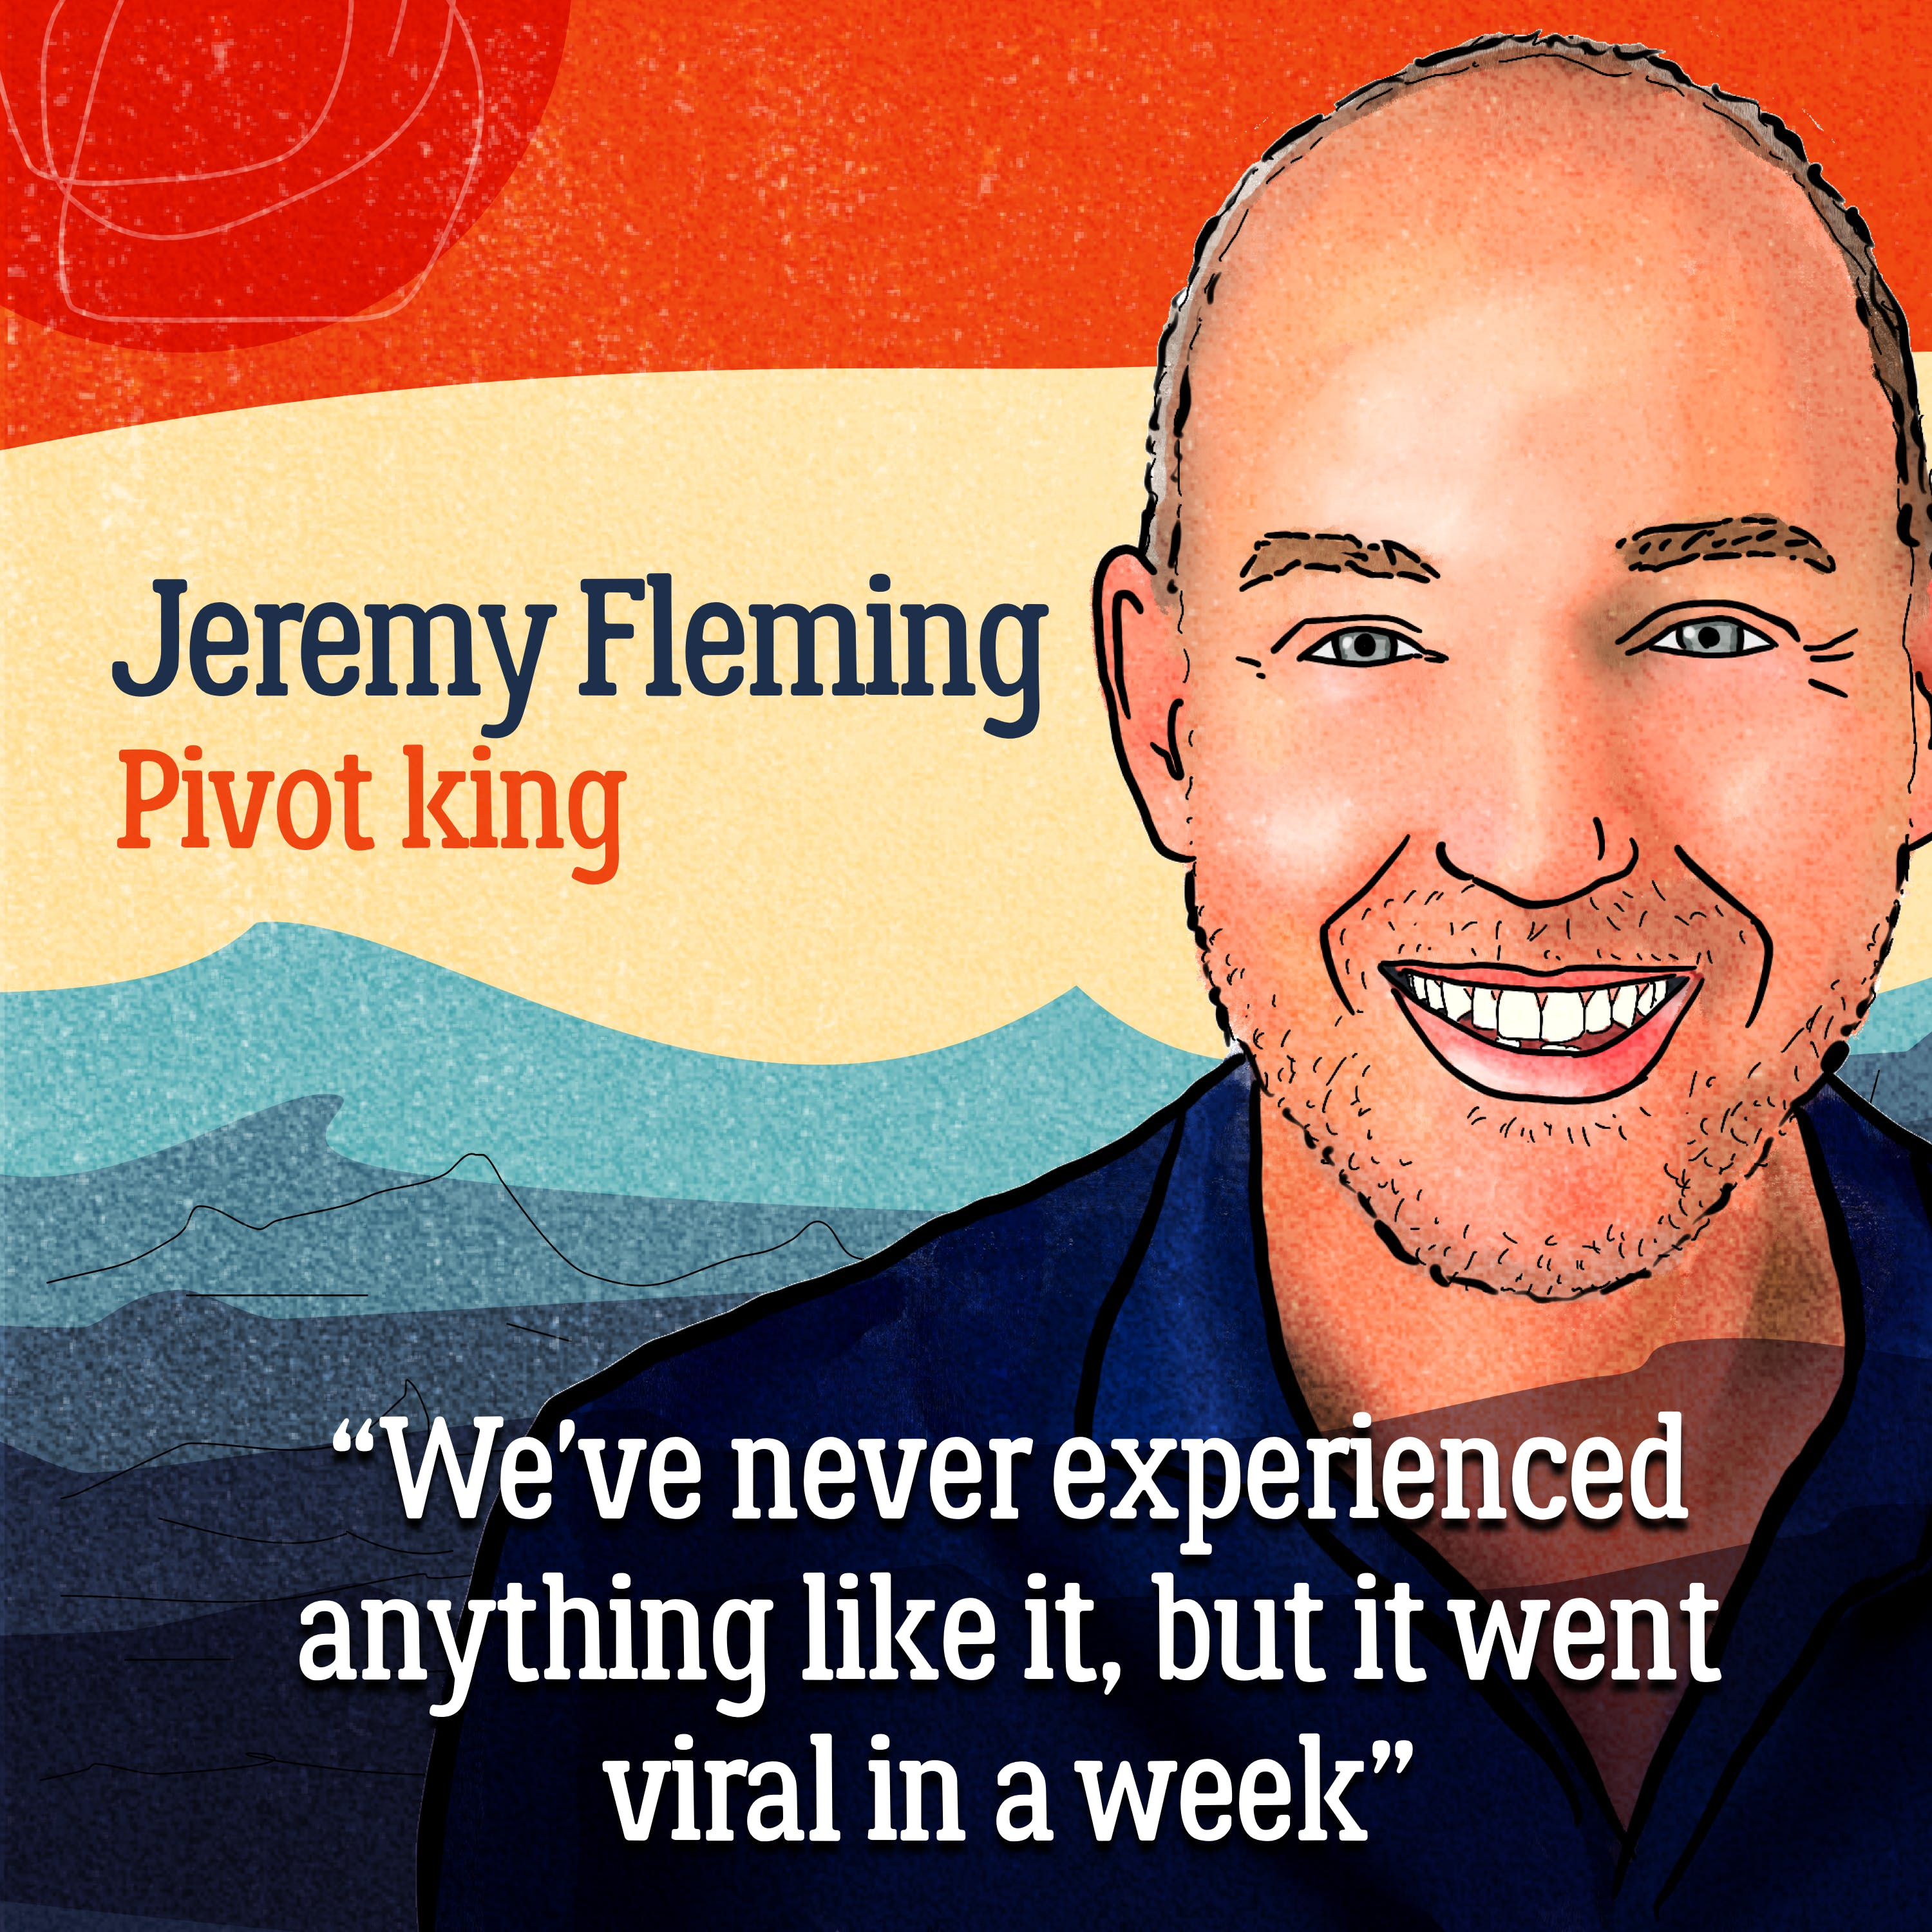 Staging a comeback — Jeremy Fleming’s show-stopping pivot from sets to desks